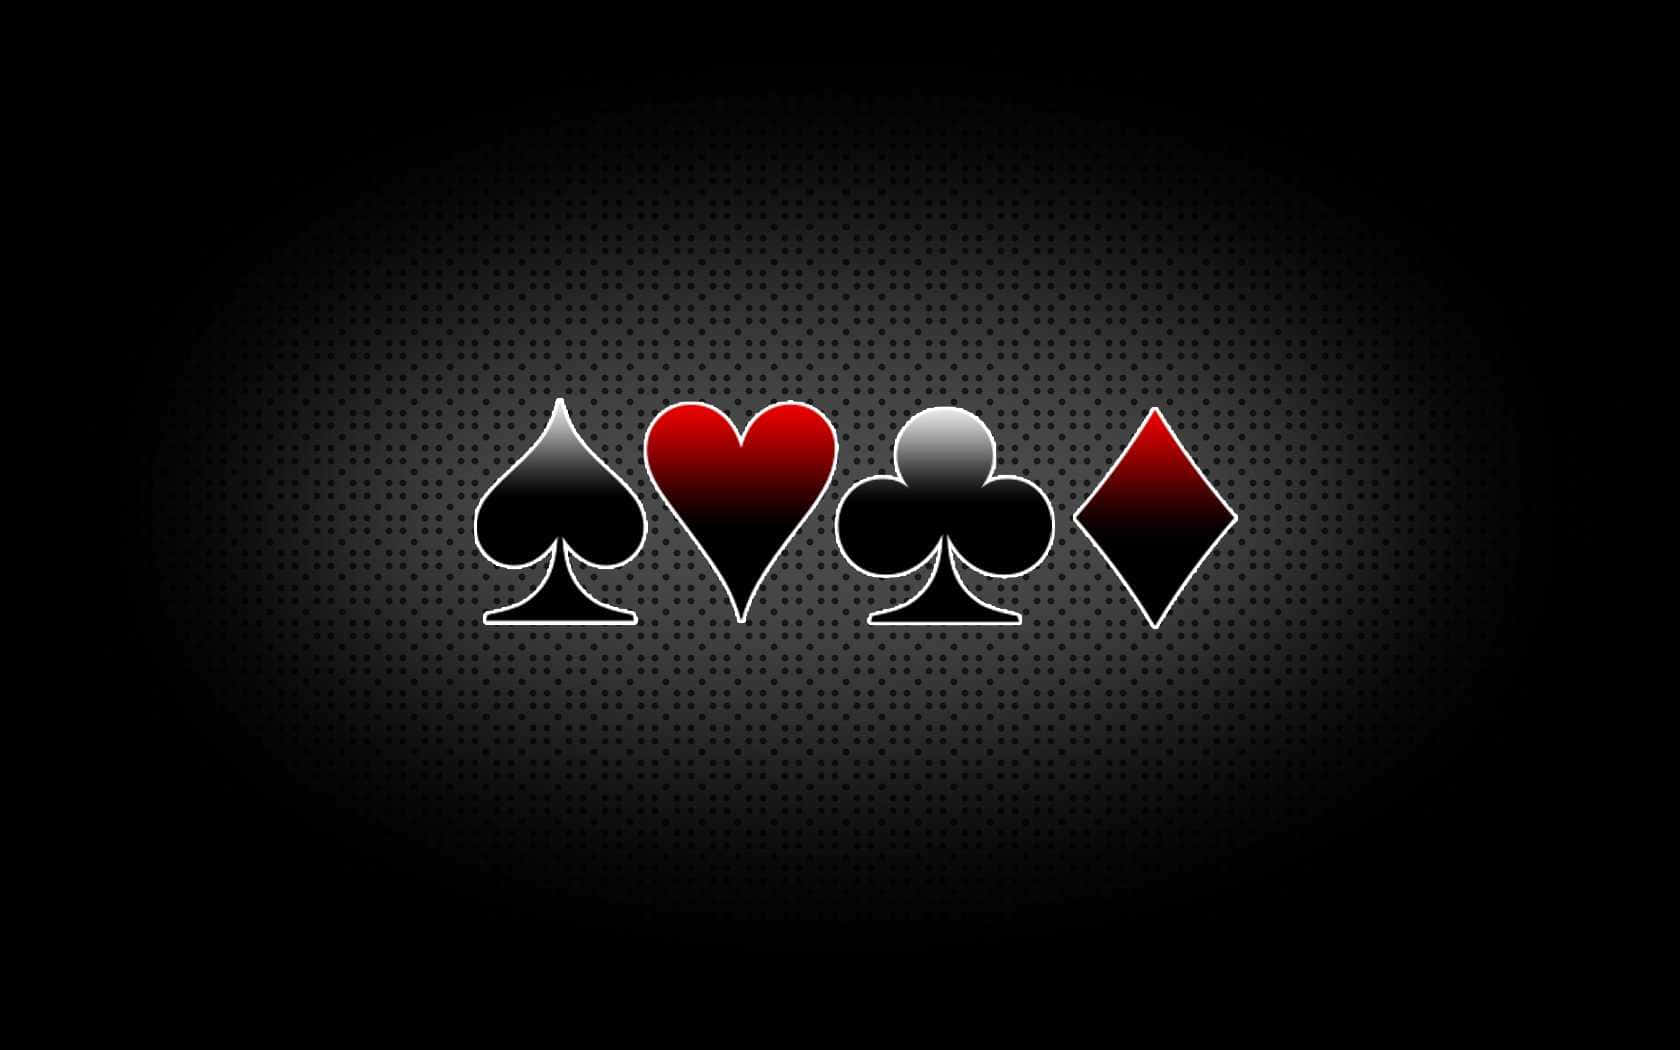 Feel the Thrill of Playing Poker